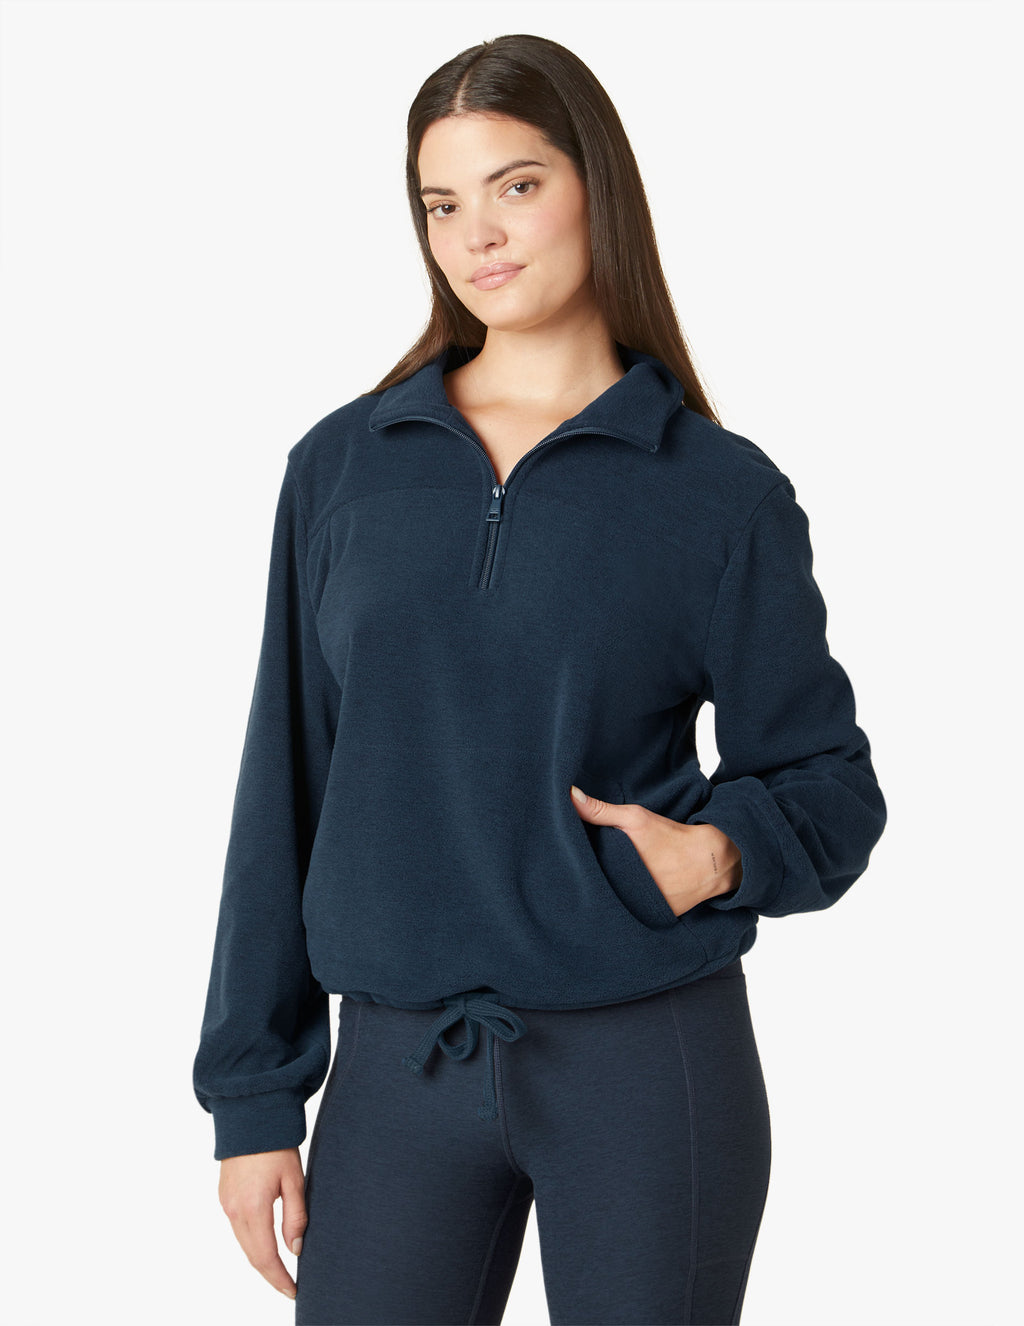 New Terrain Pullover Featured Image